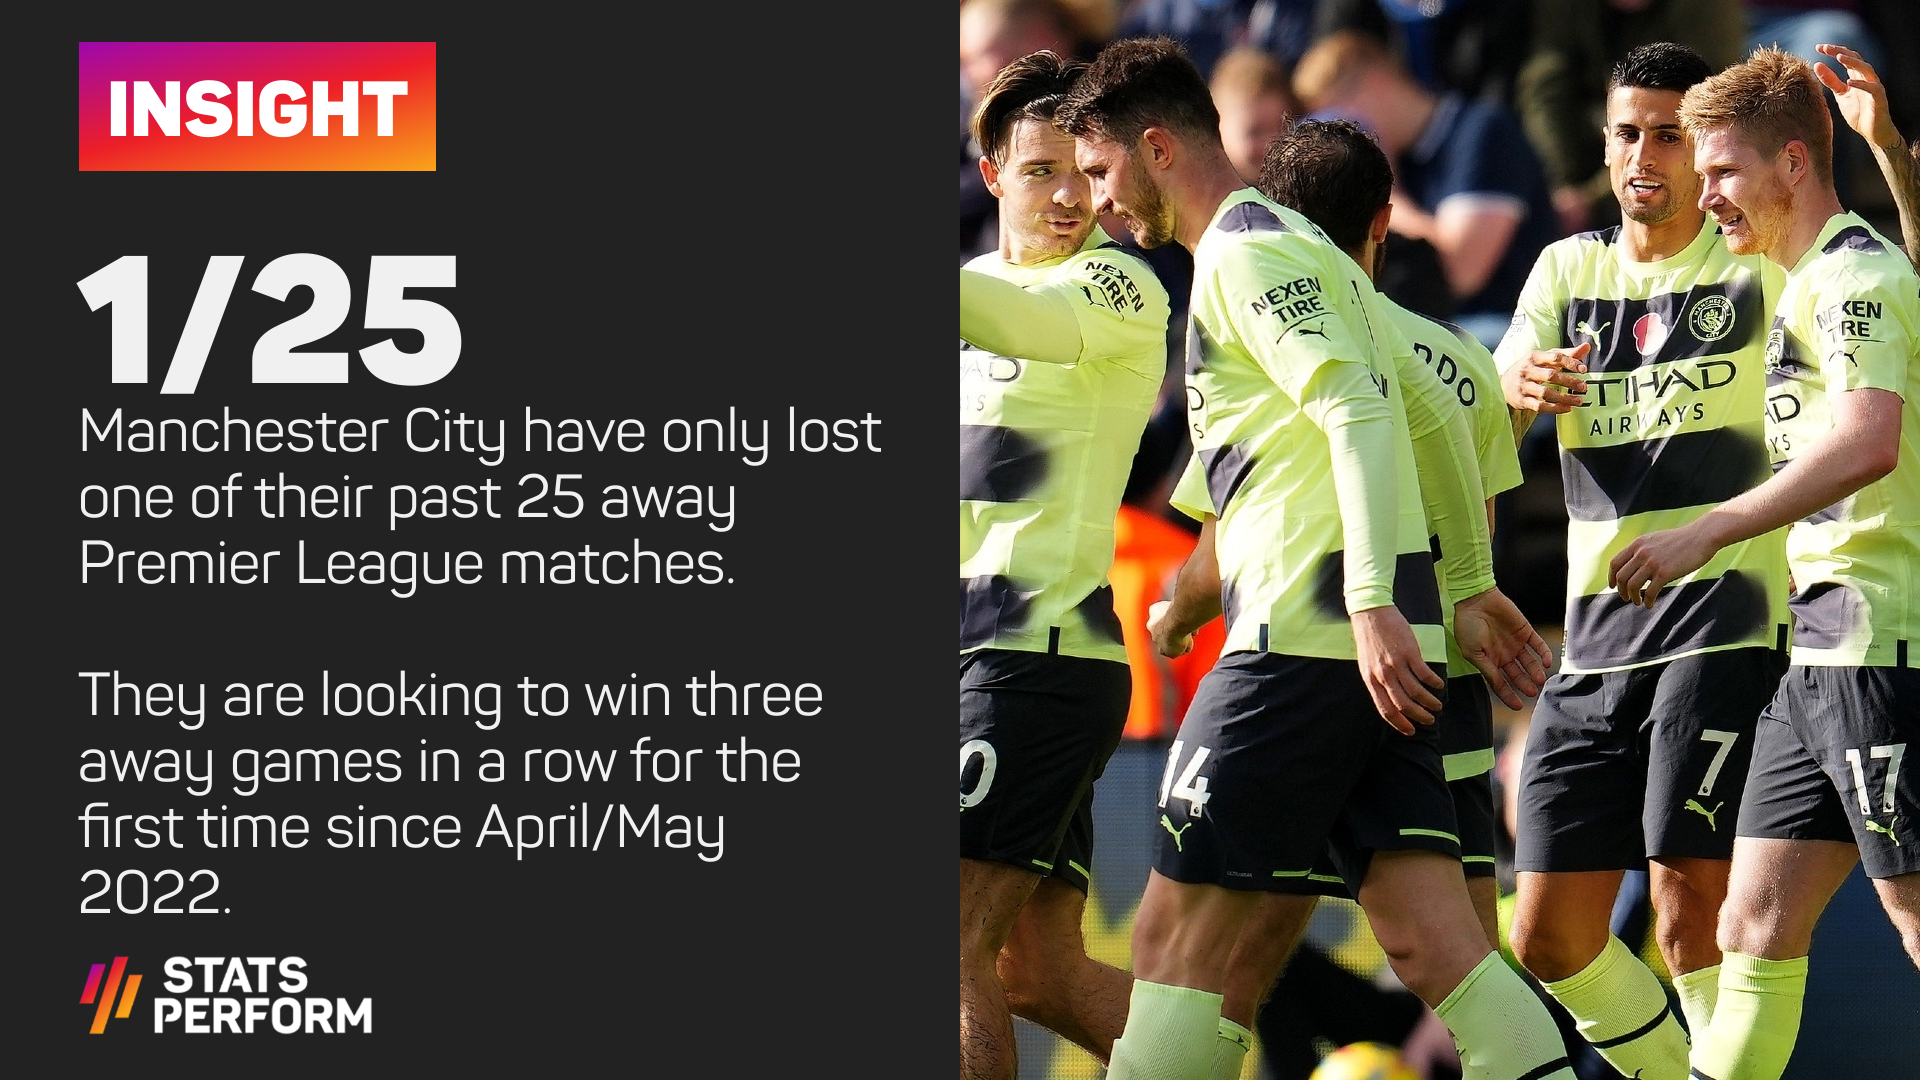 Manchester City have lost only one of their past 25 away Premier League games